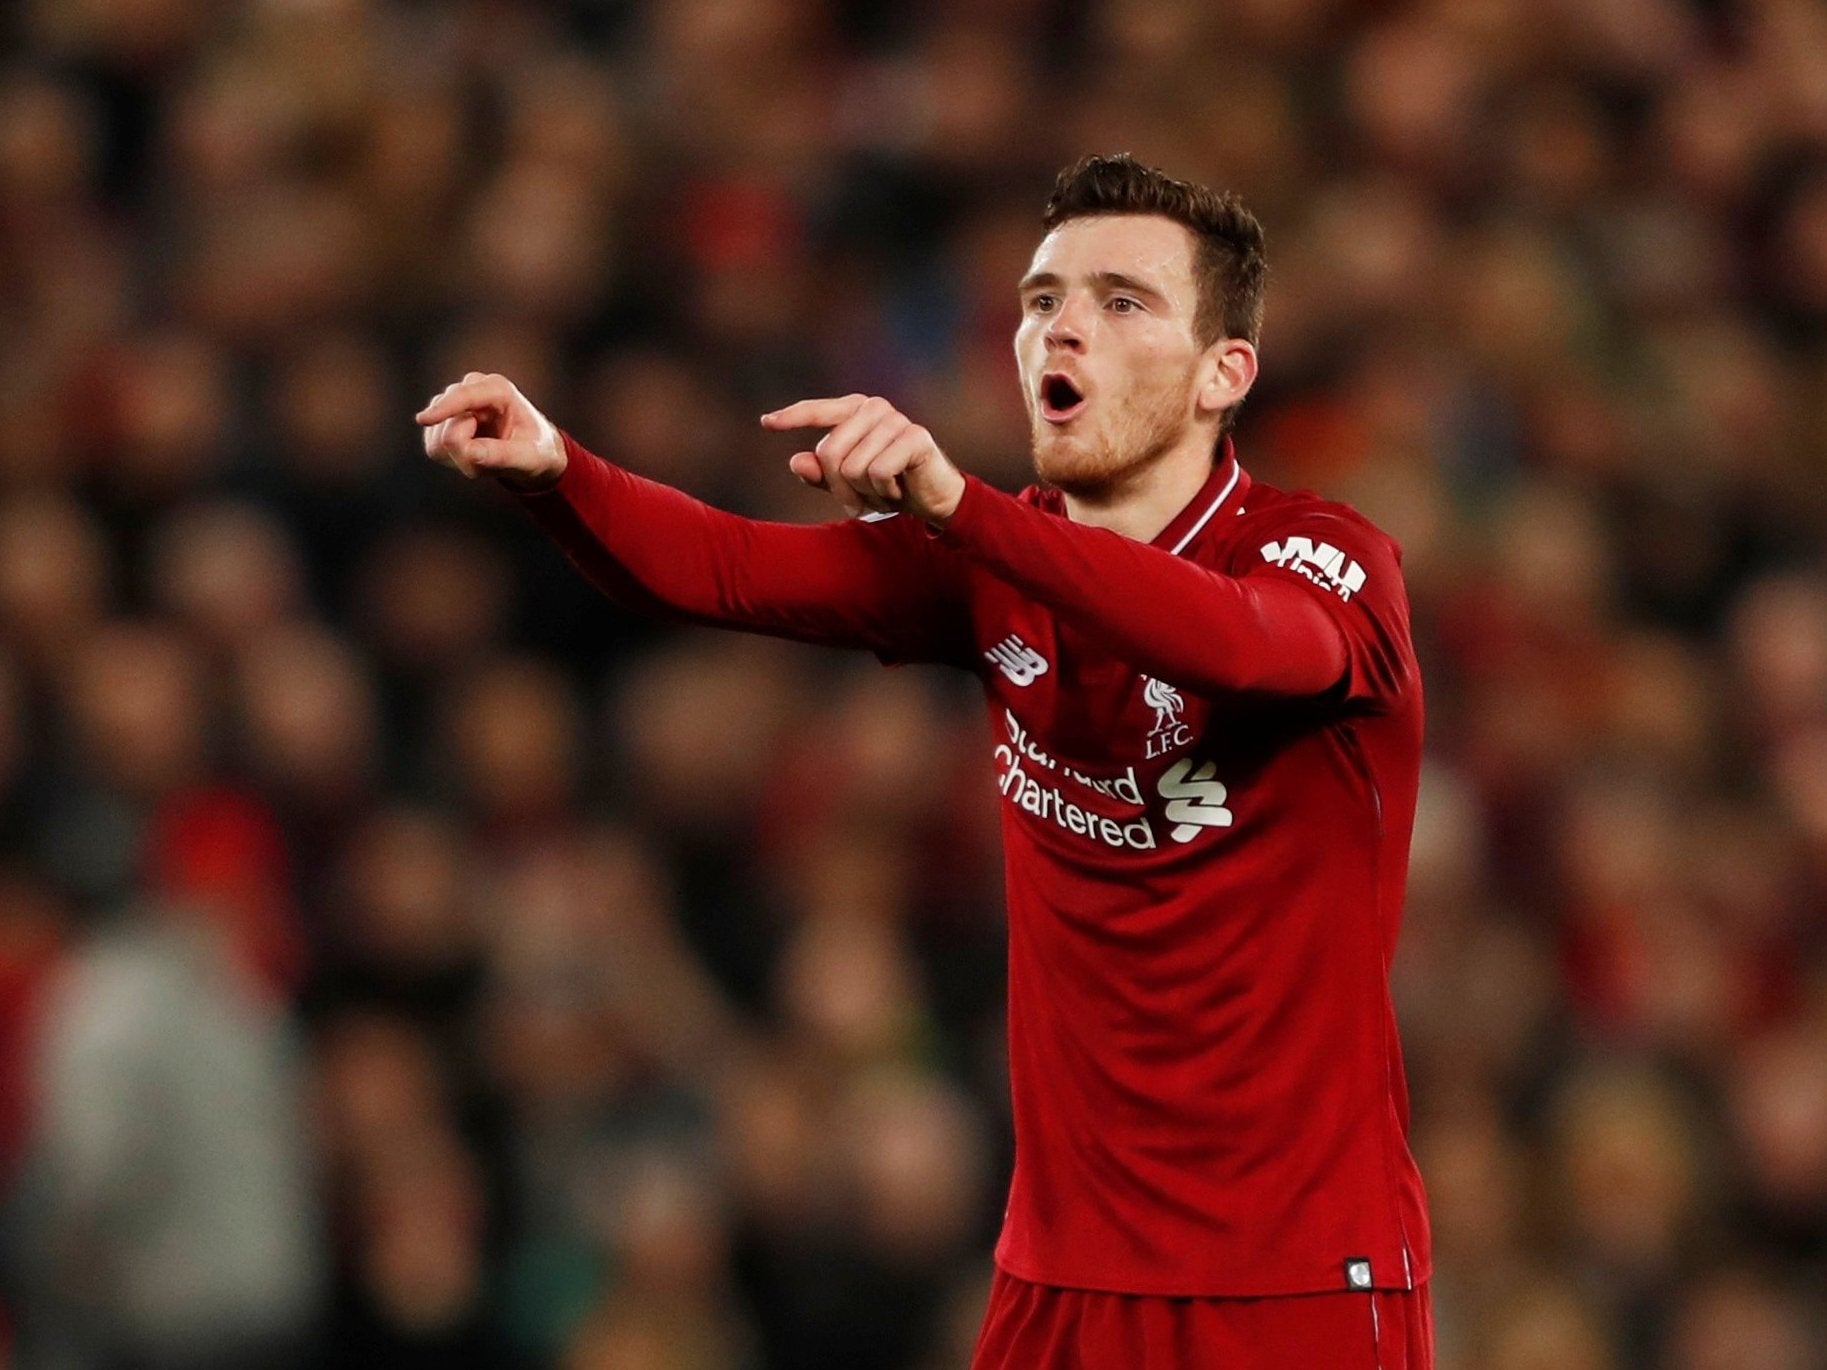 Andrew Robertson has qualities to be future Liverpool captain